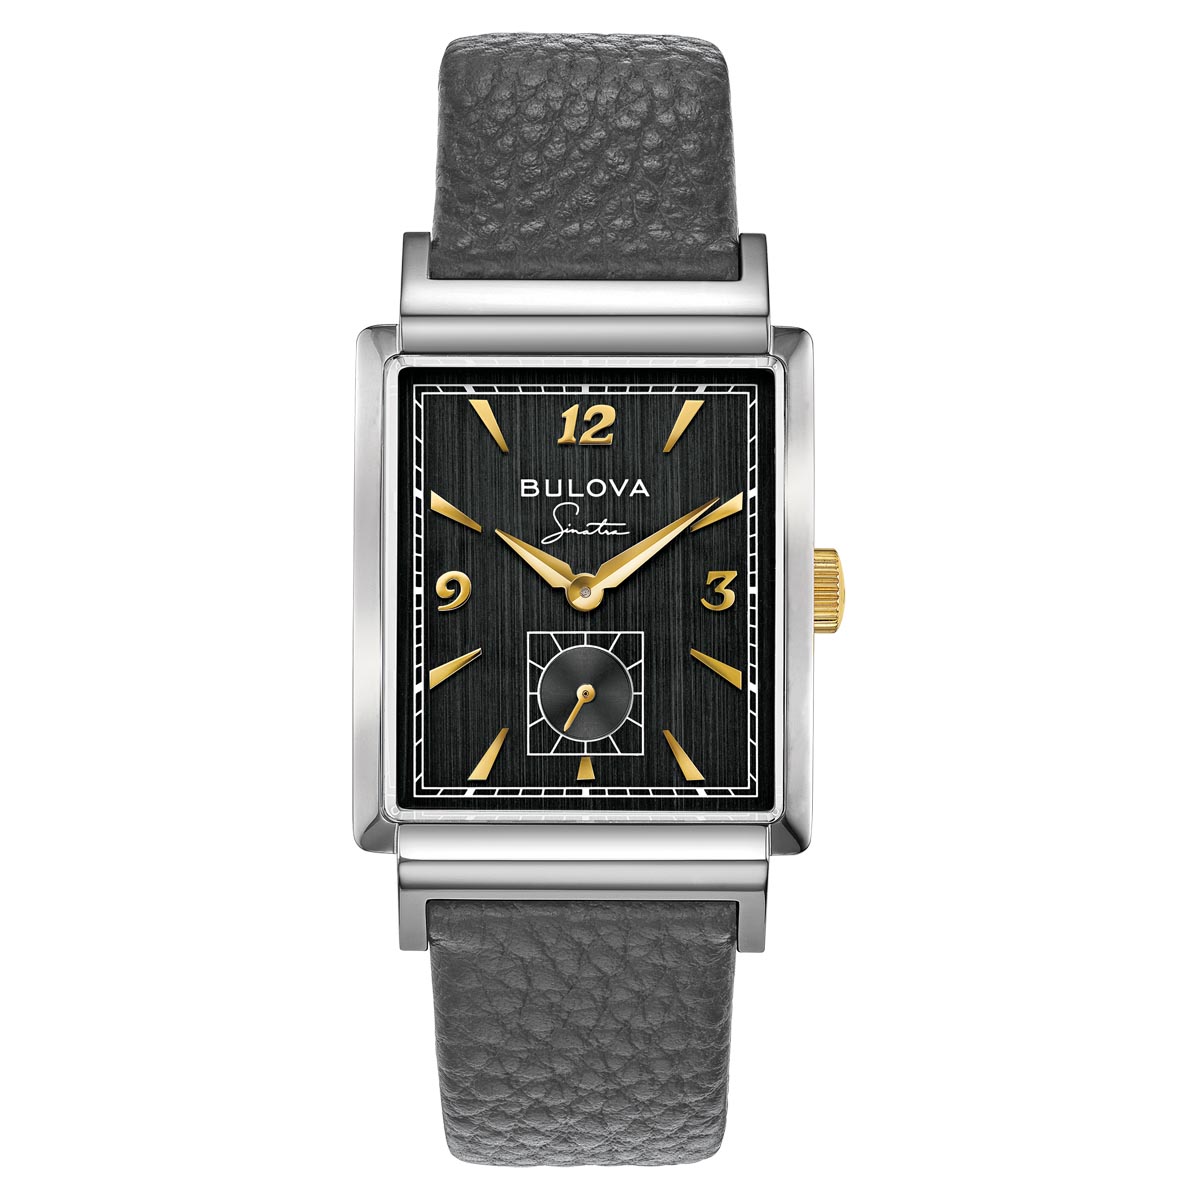 Bulova Frank Sinatra My Way Watch with White Dial and Gray Textured Leather Strap (quartz movement)